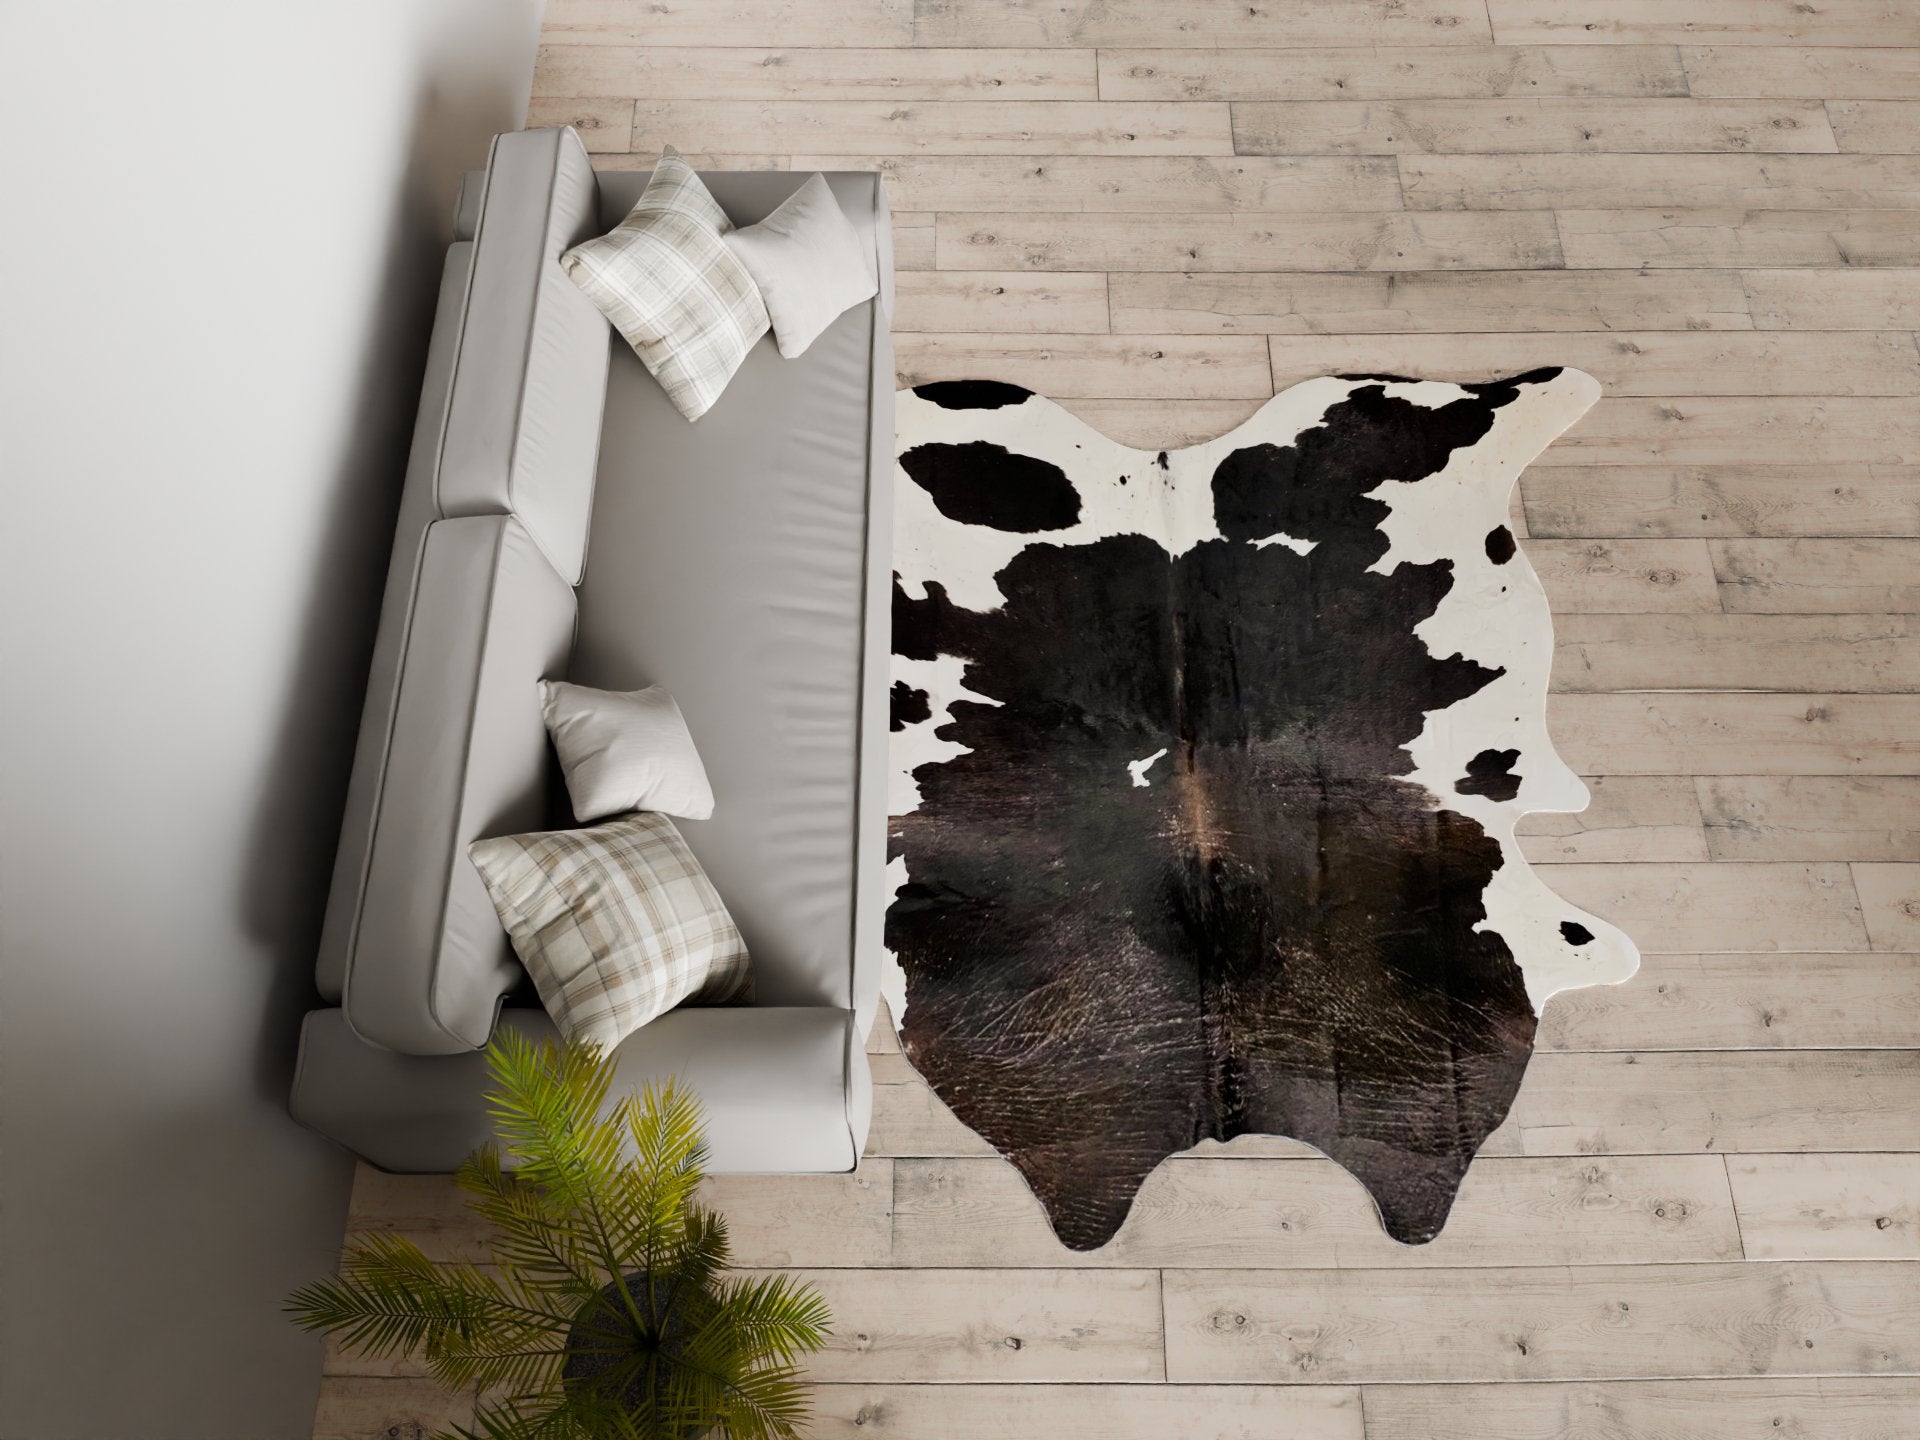 Black and White Cowhide Rug Size 6.6x8 ft---4666 - Rodeo Cowhide Rugs